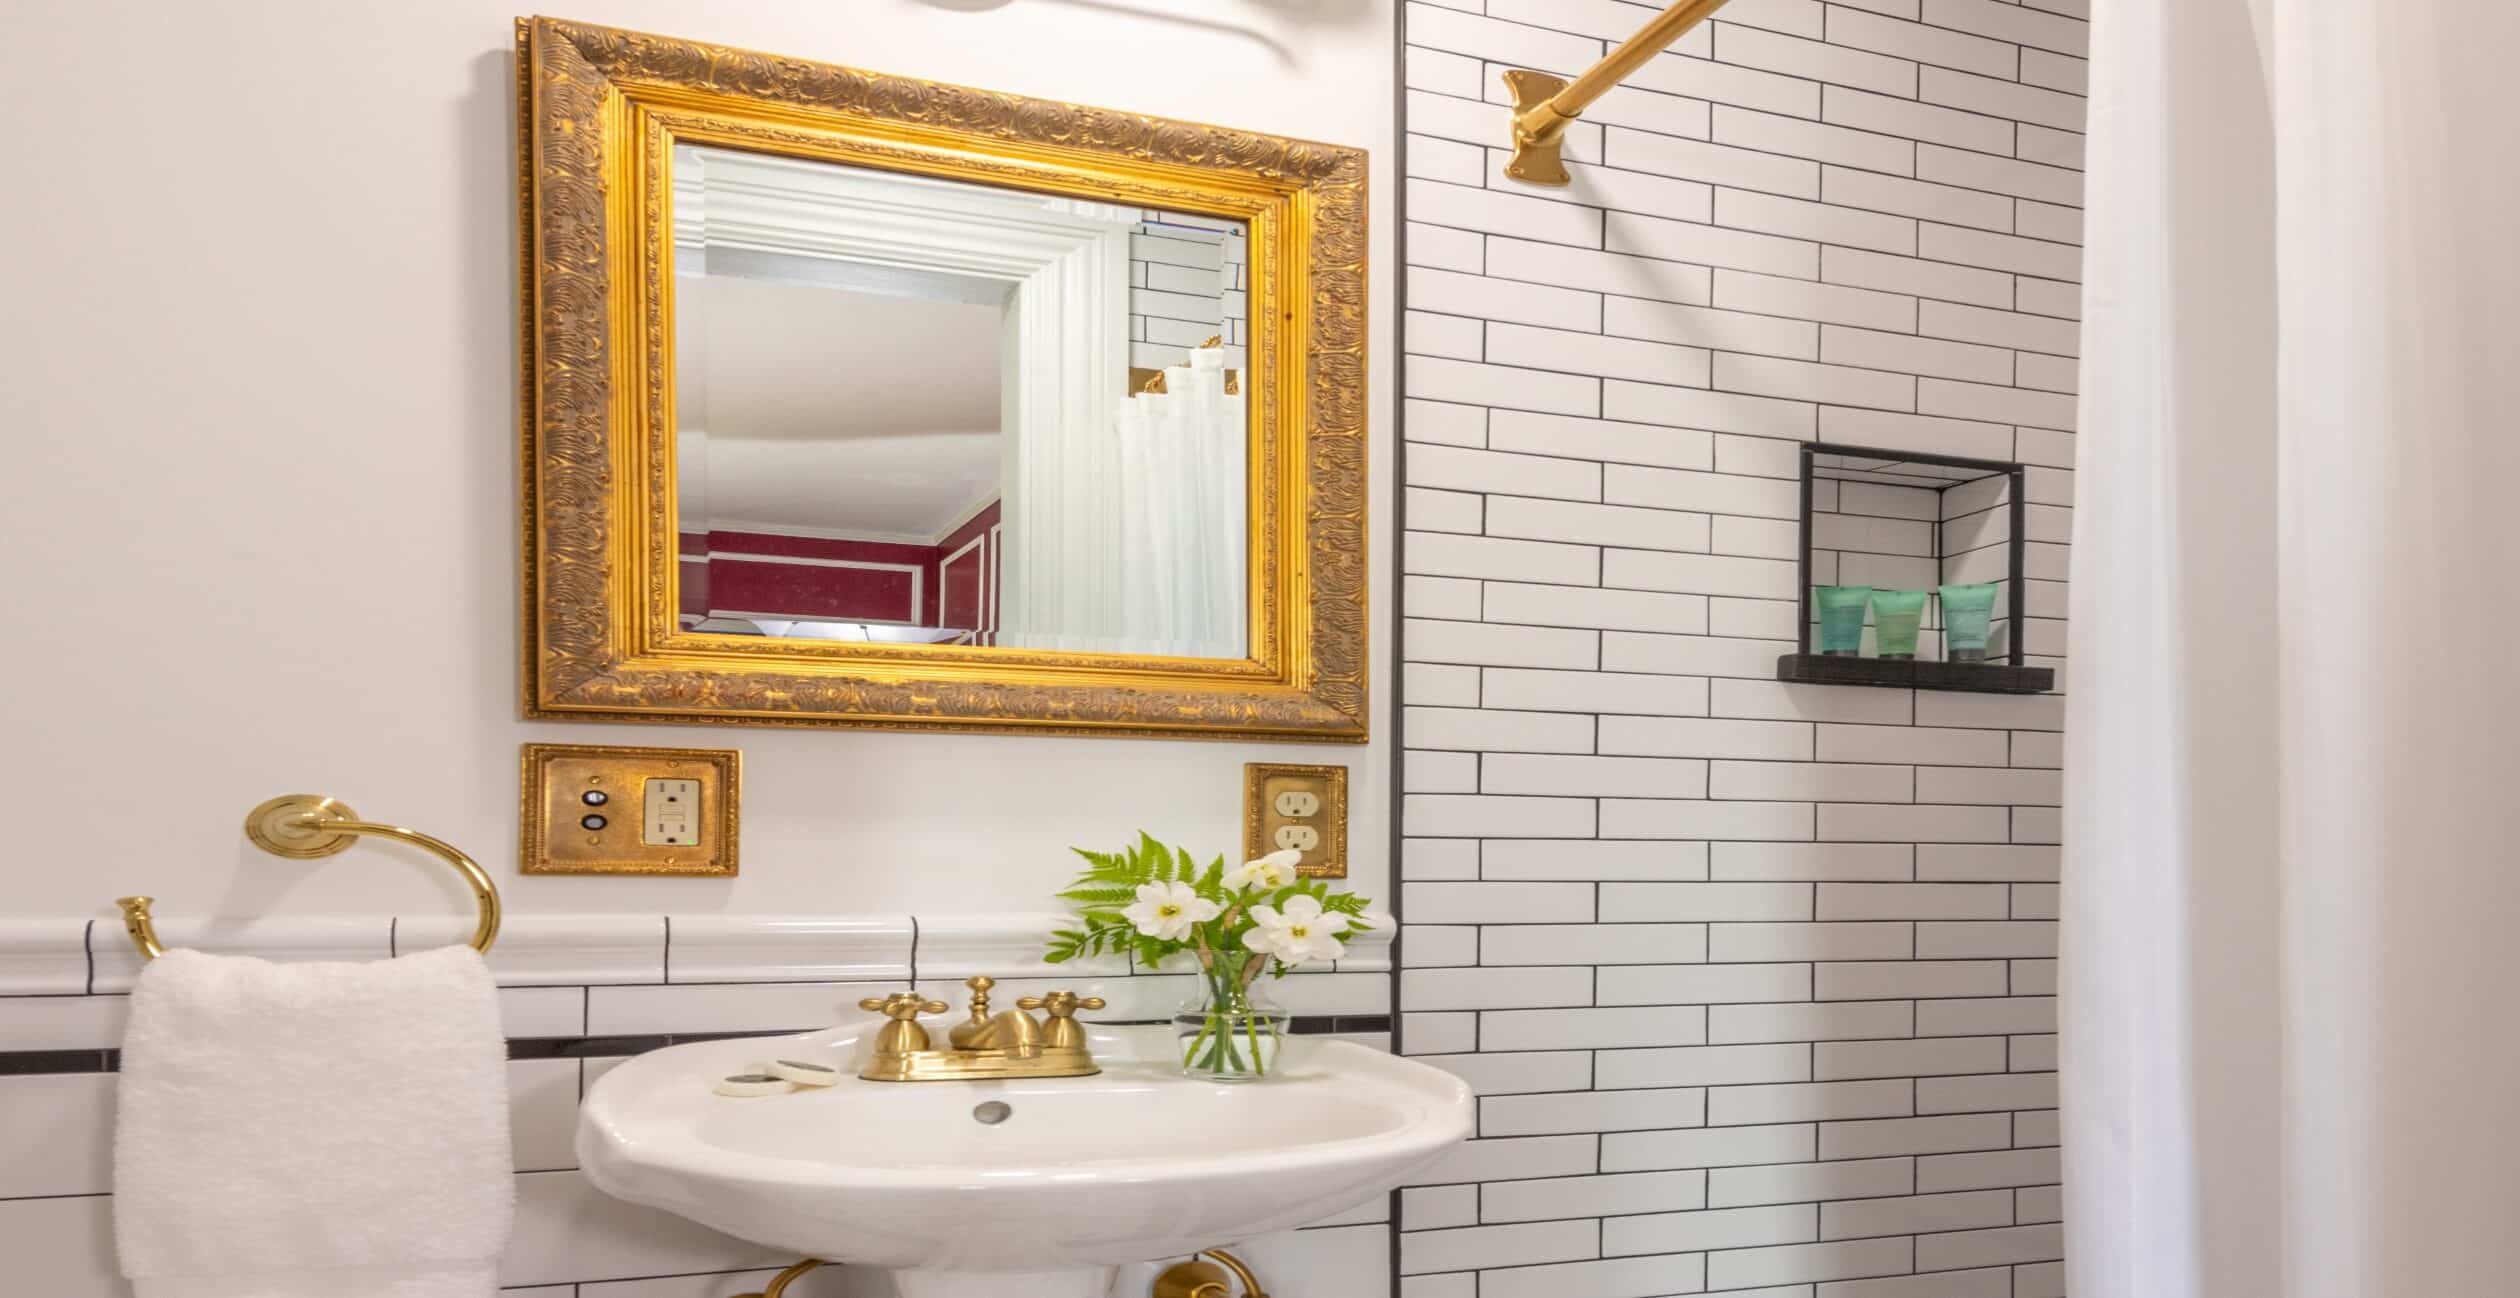 Bathroom sink and shower with white subway tiles and gold fixtures